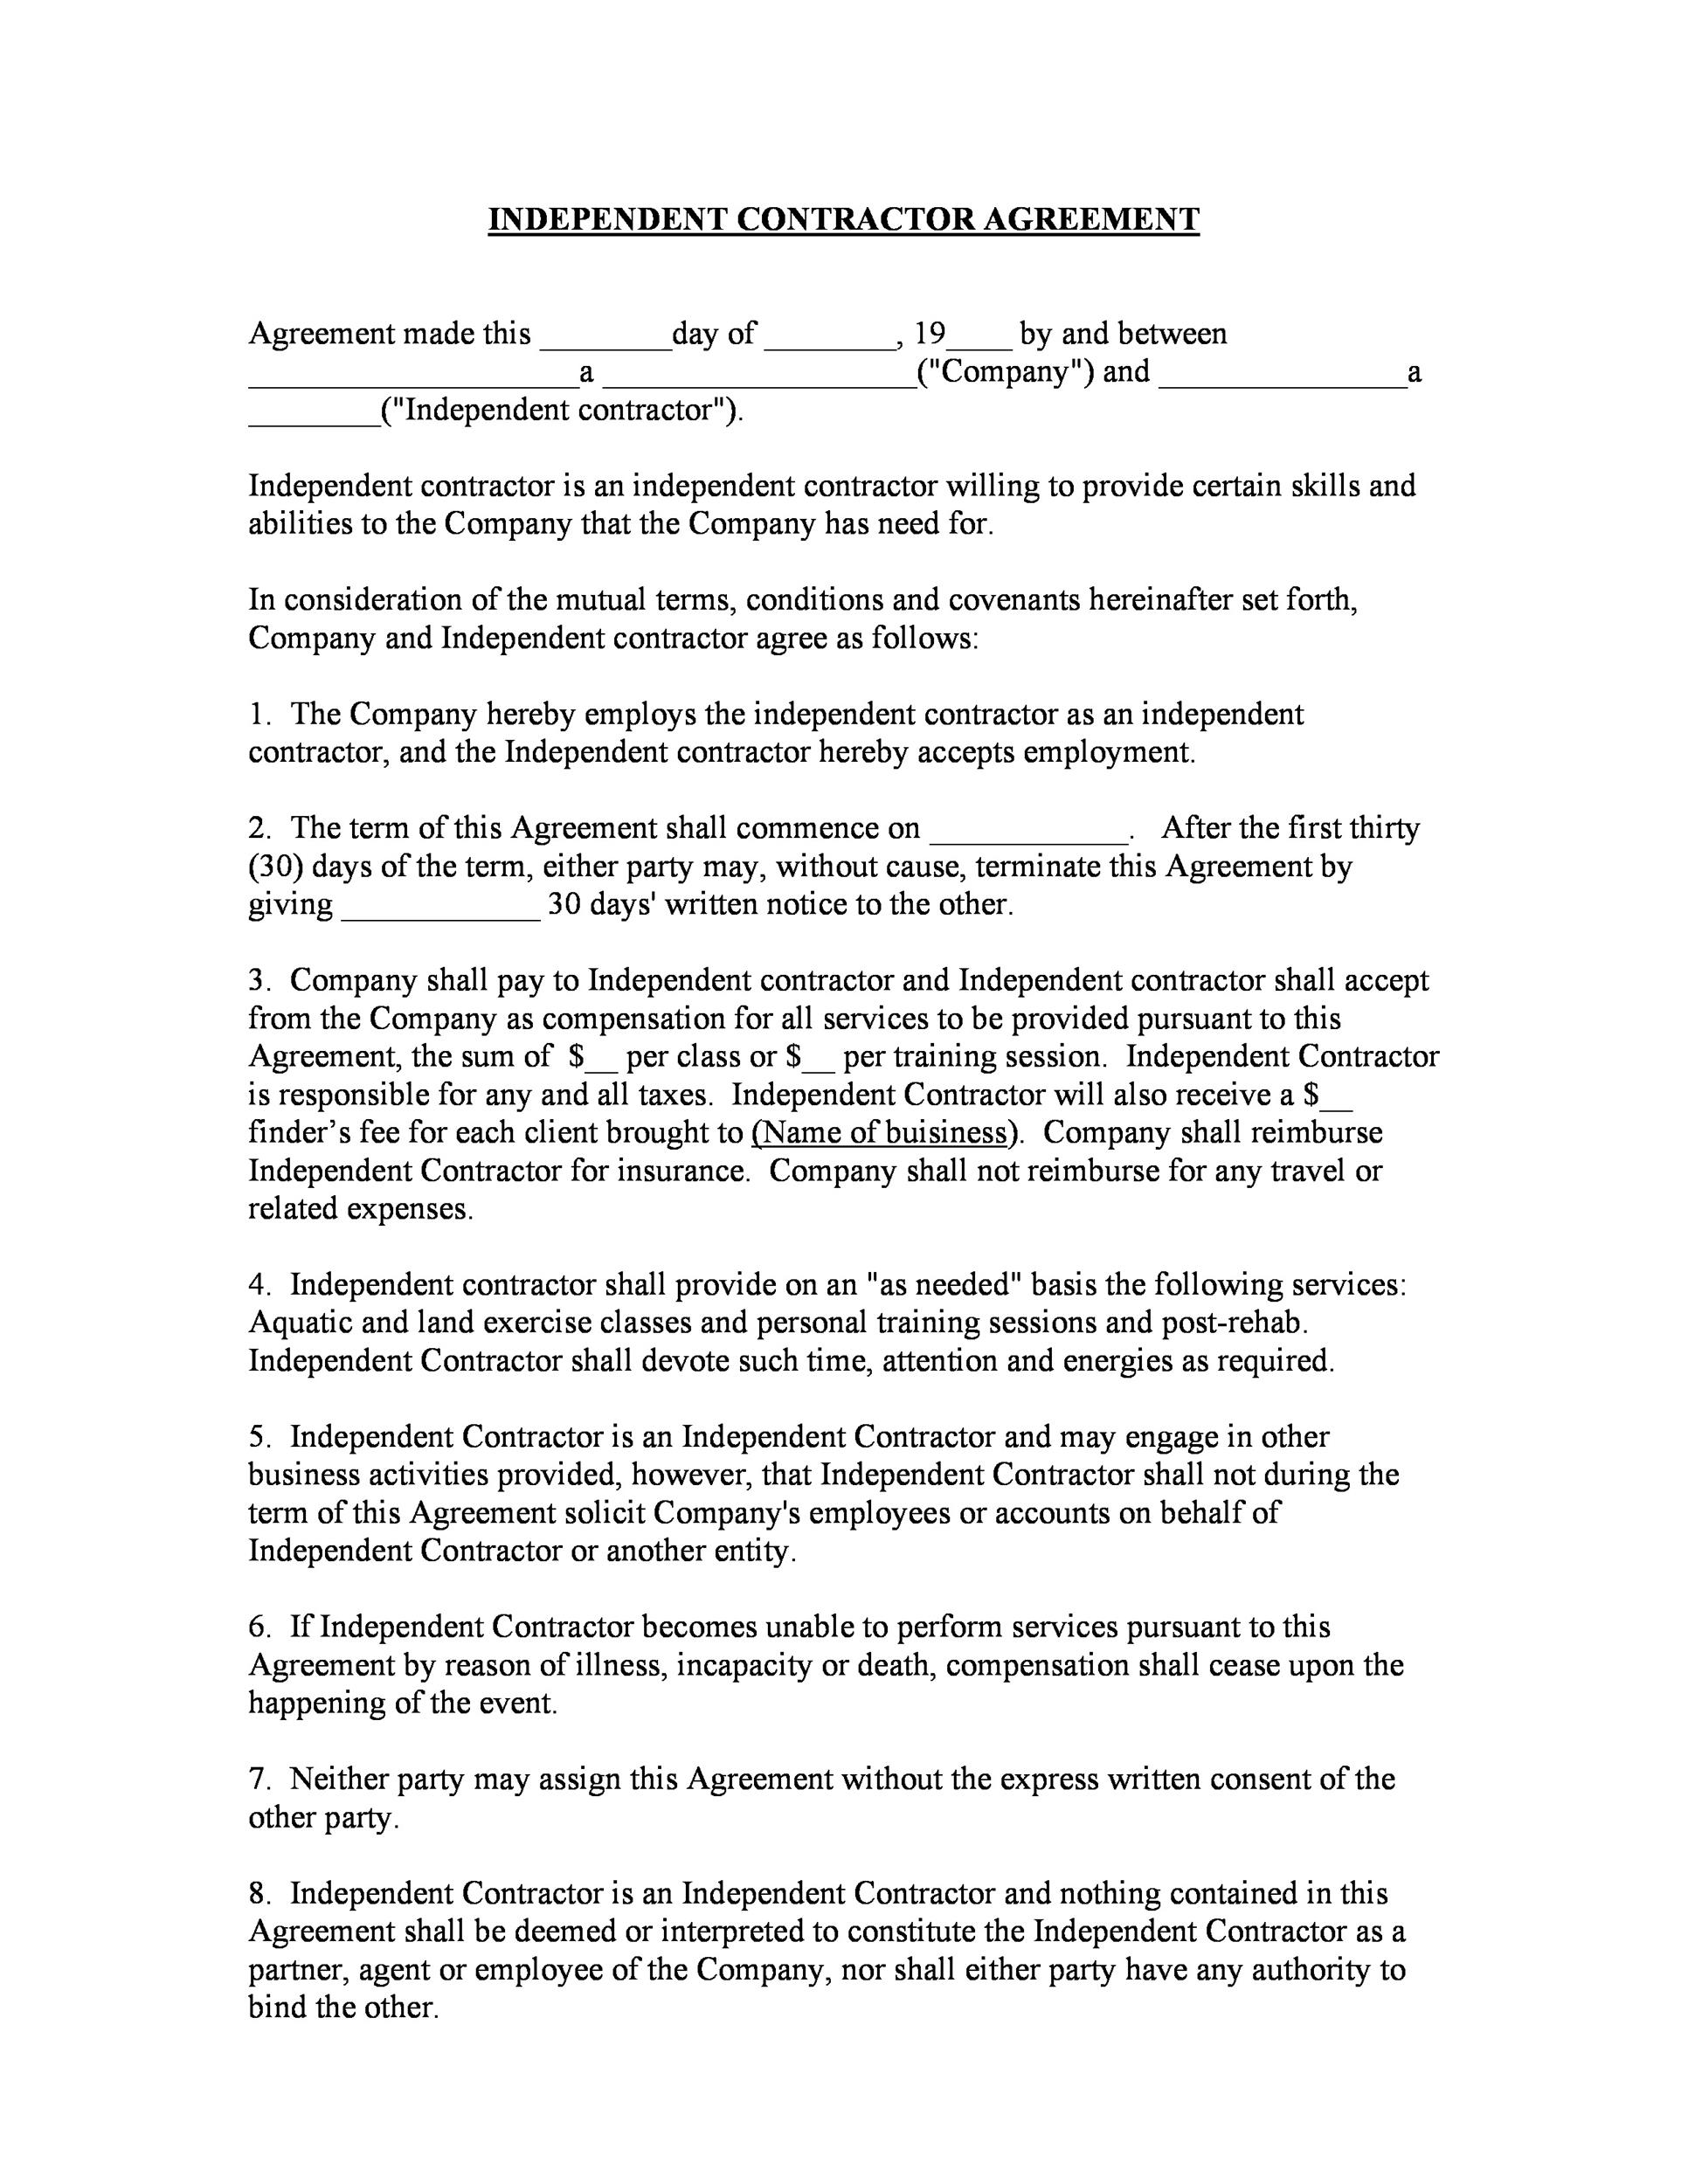 Free independent contractor agreement 02